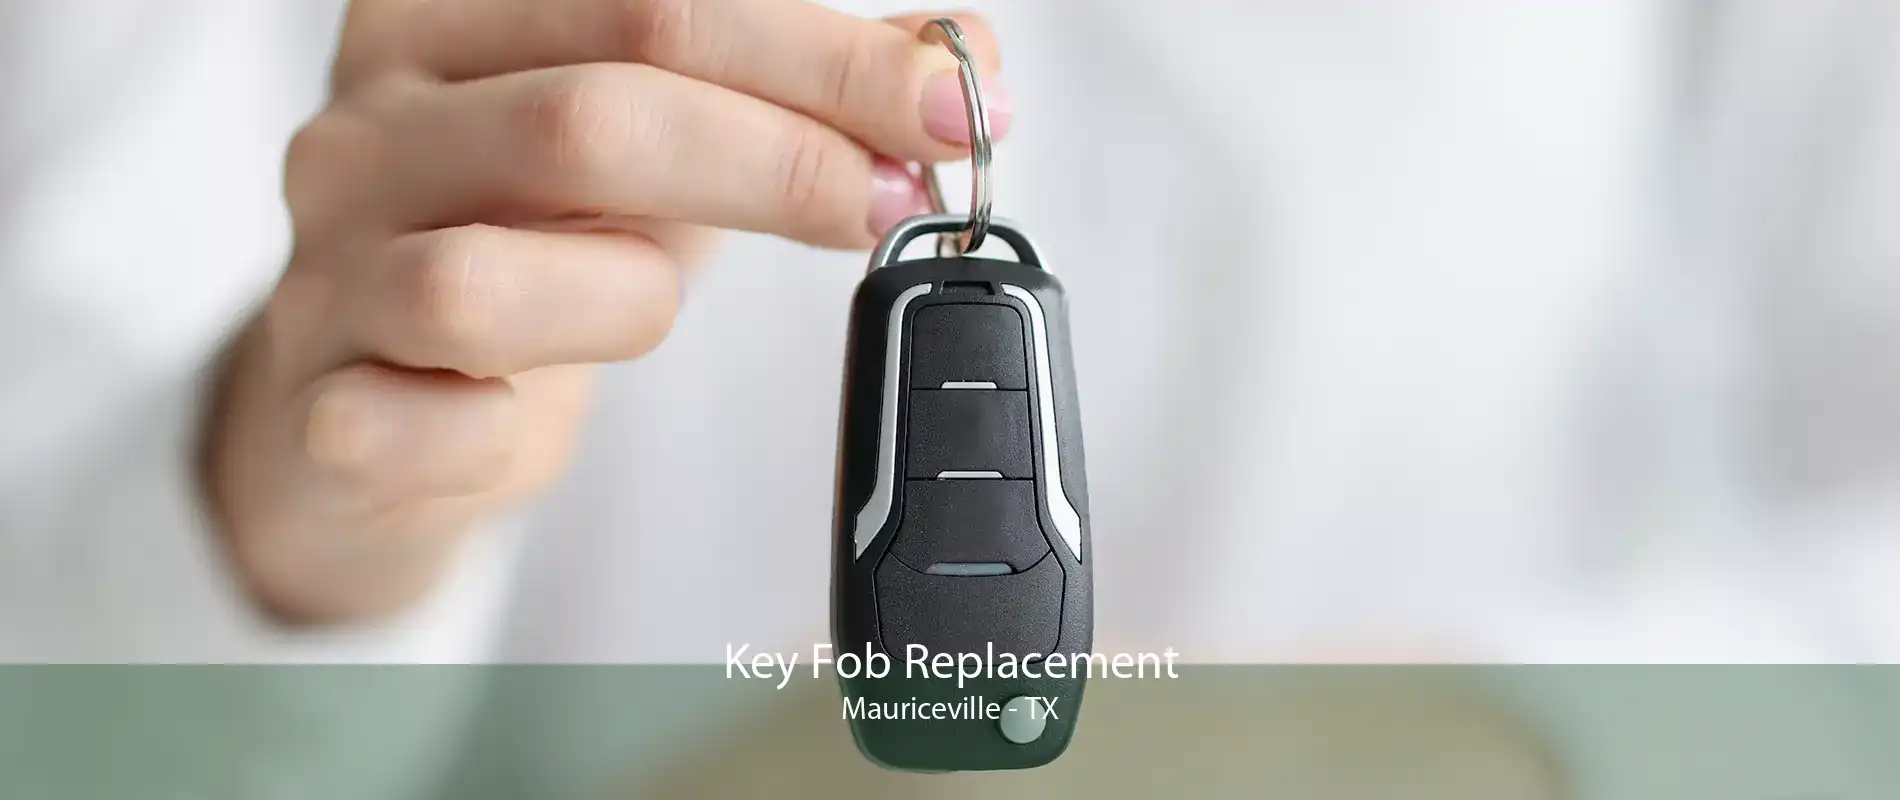 Key Fob Replacement Mauriceville - TX